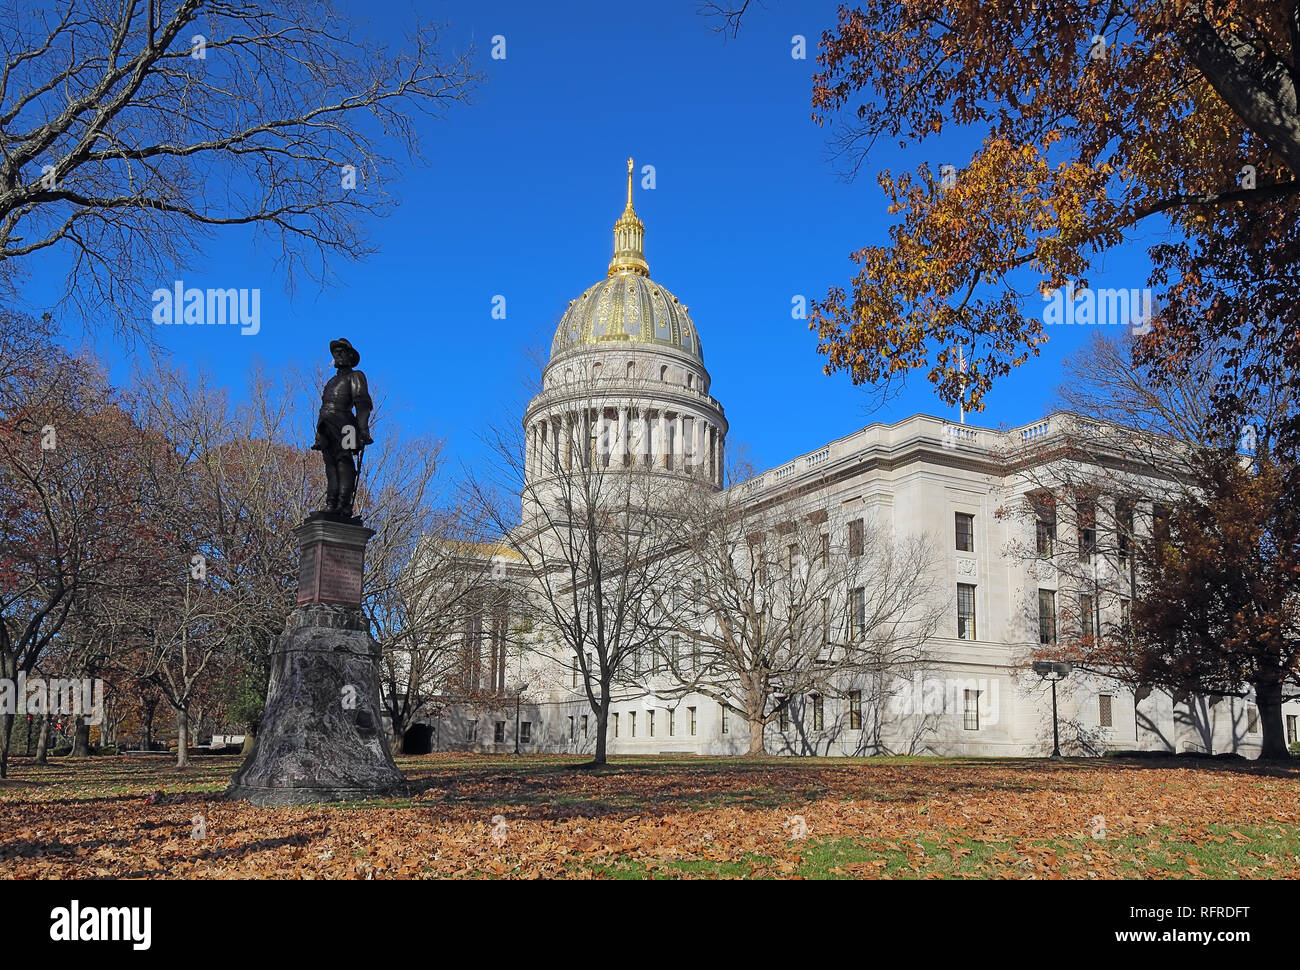 Historical statue and dome of the West Virginia capitol building in Charleston against a blight blue autumn sky Stock Photo